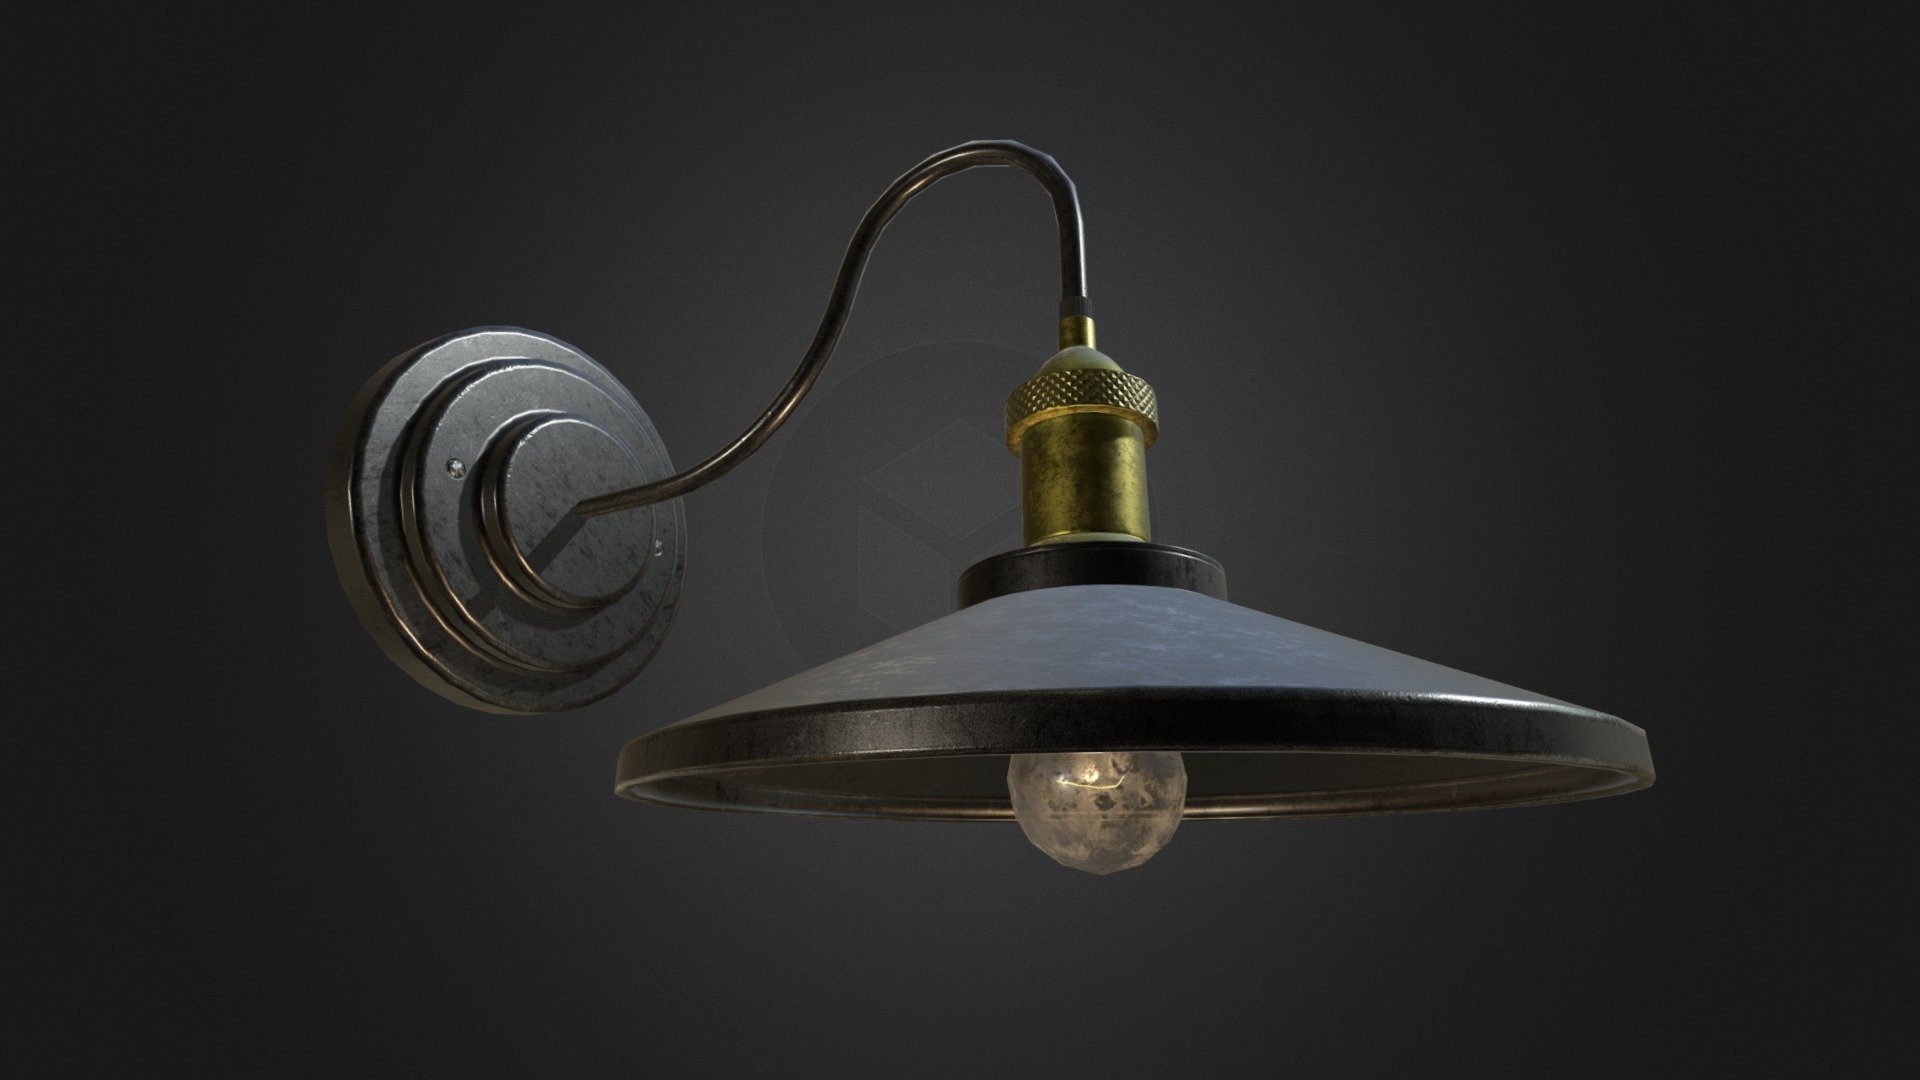 Vintage Wall Lamp asset was modeled in Blender and textured in Substance Painter with 4k pbr textures. This model is ready to use ingame and is composed by 2282 poligons 3d model